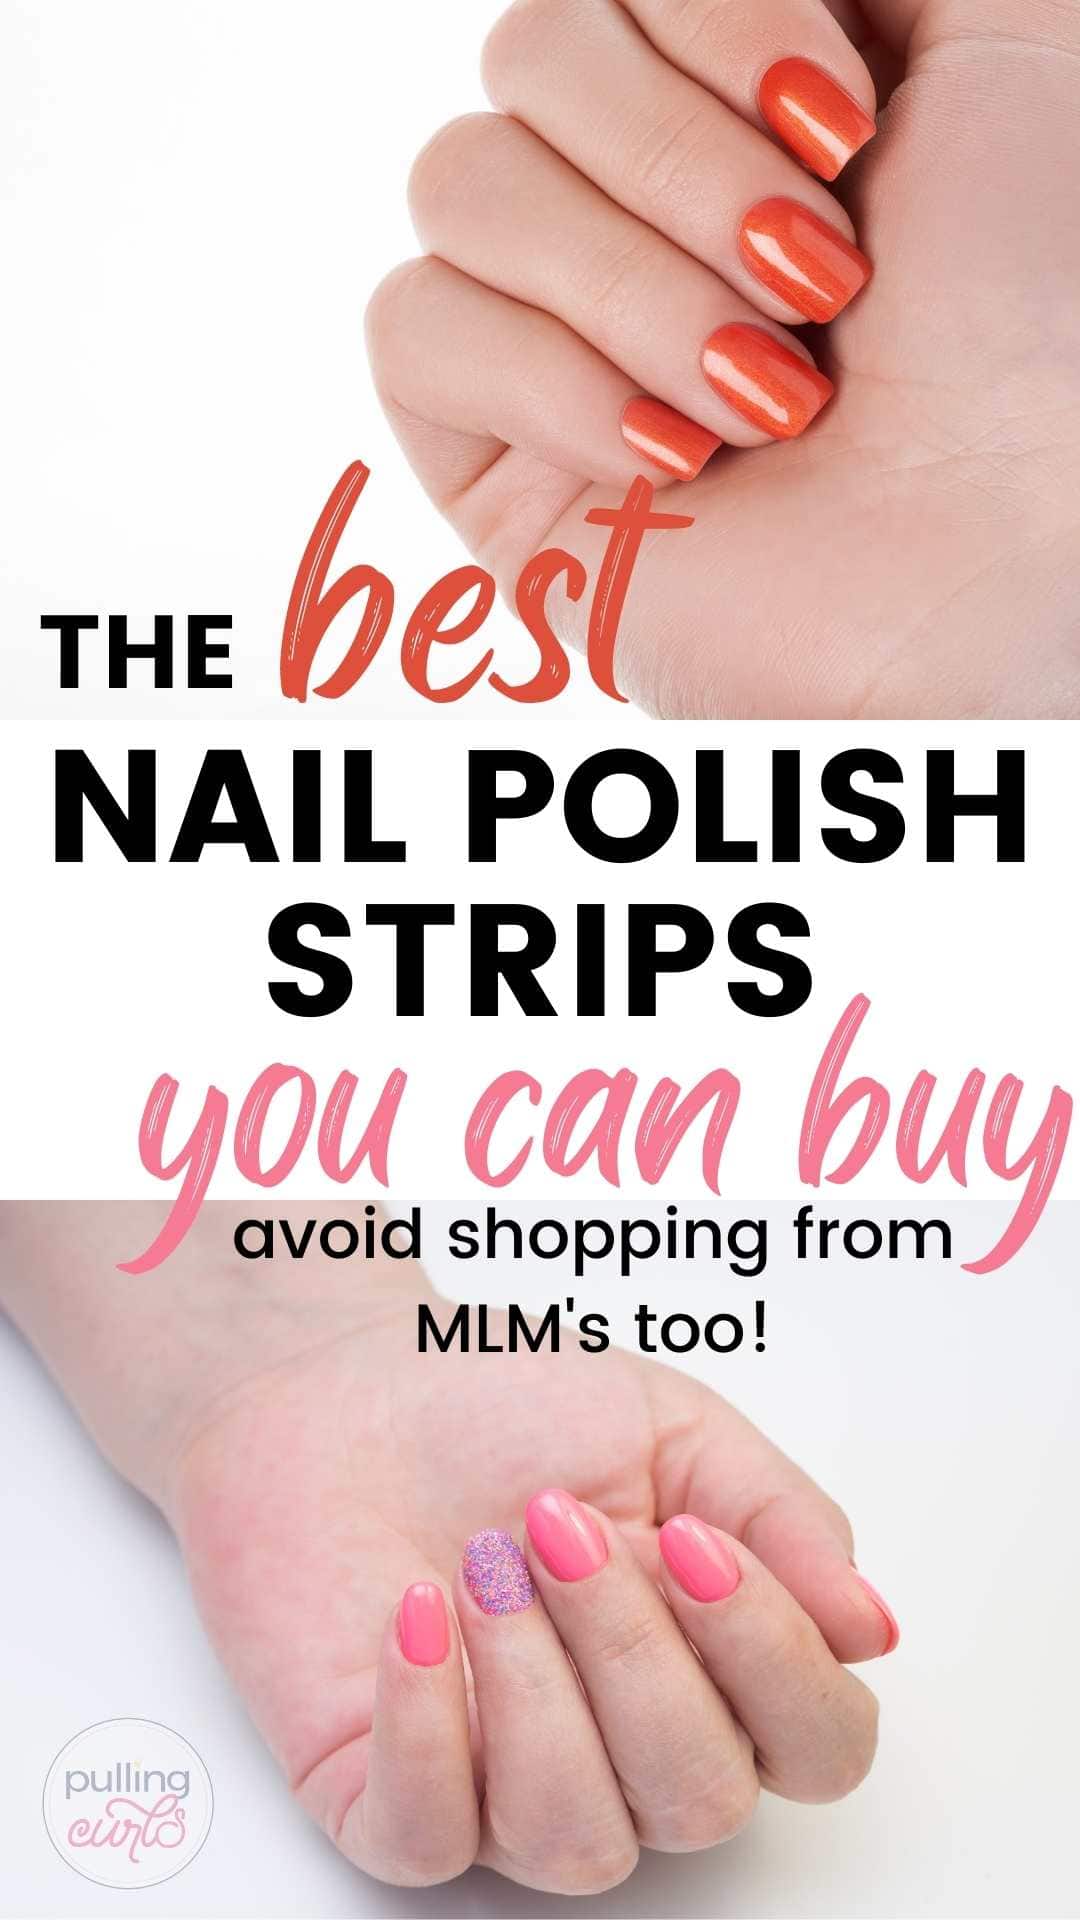 How do you remove color street nails